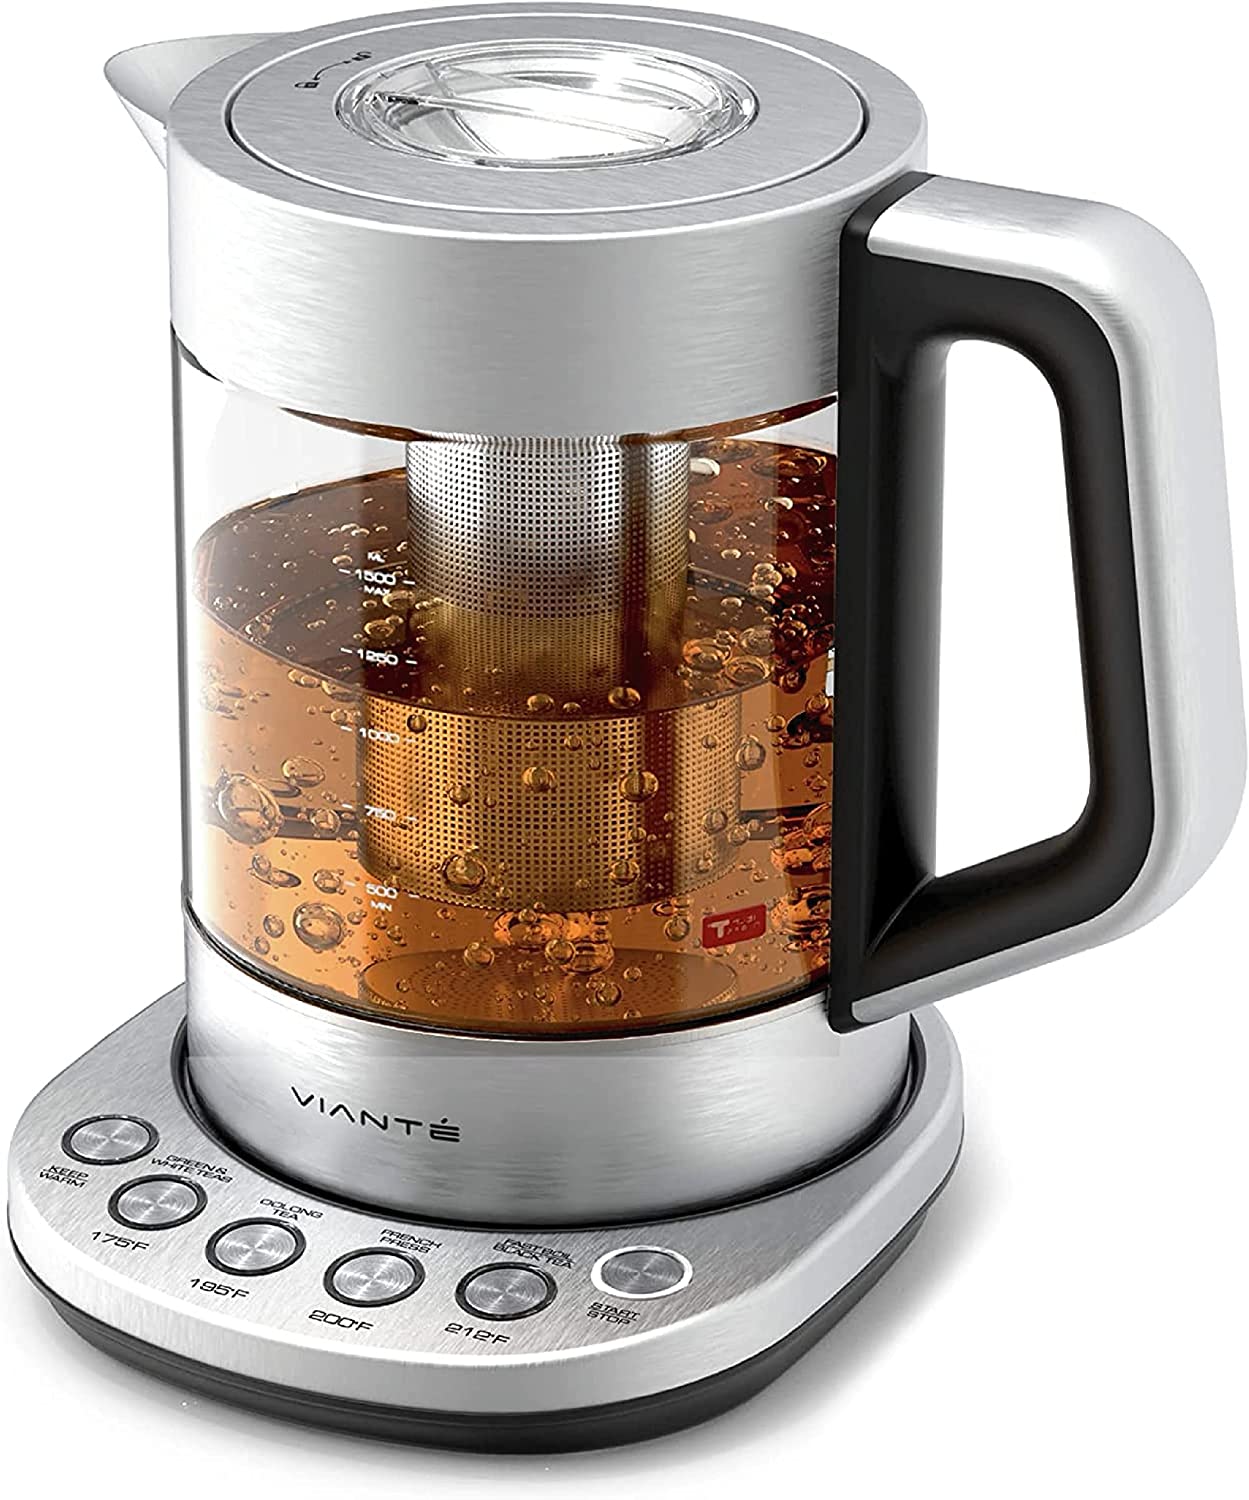 https://bigbigmart.com/wp-content/uploads/2023/07/Hot-Tea-Maker-Electric-Glass-Kettle-with-tea-infuser-and-temperature-control.-Automatic-Shut-off.-Brewing-Programs-for-your-favorite-teas-and-Coffee..jpg